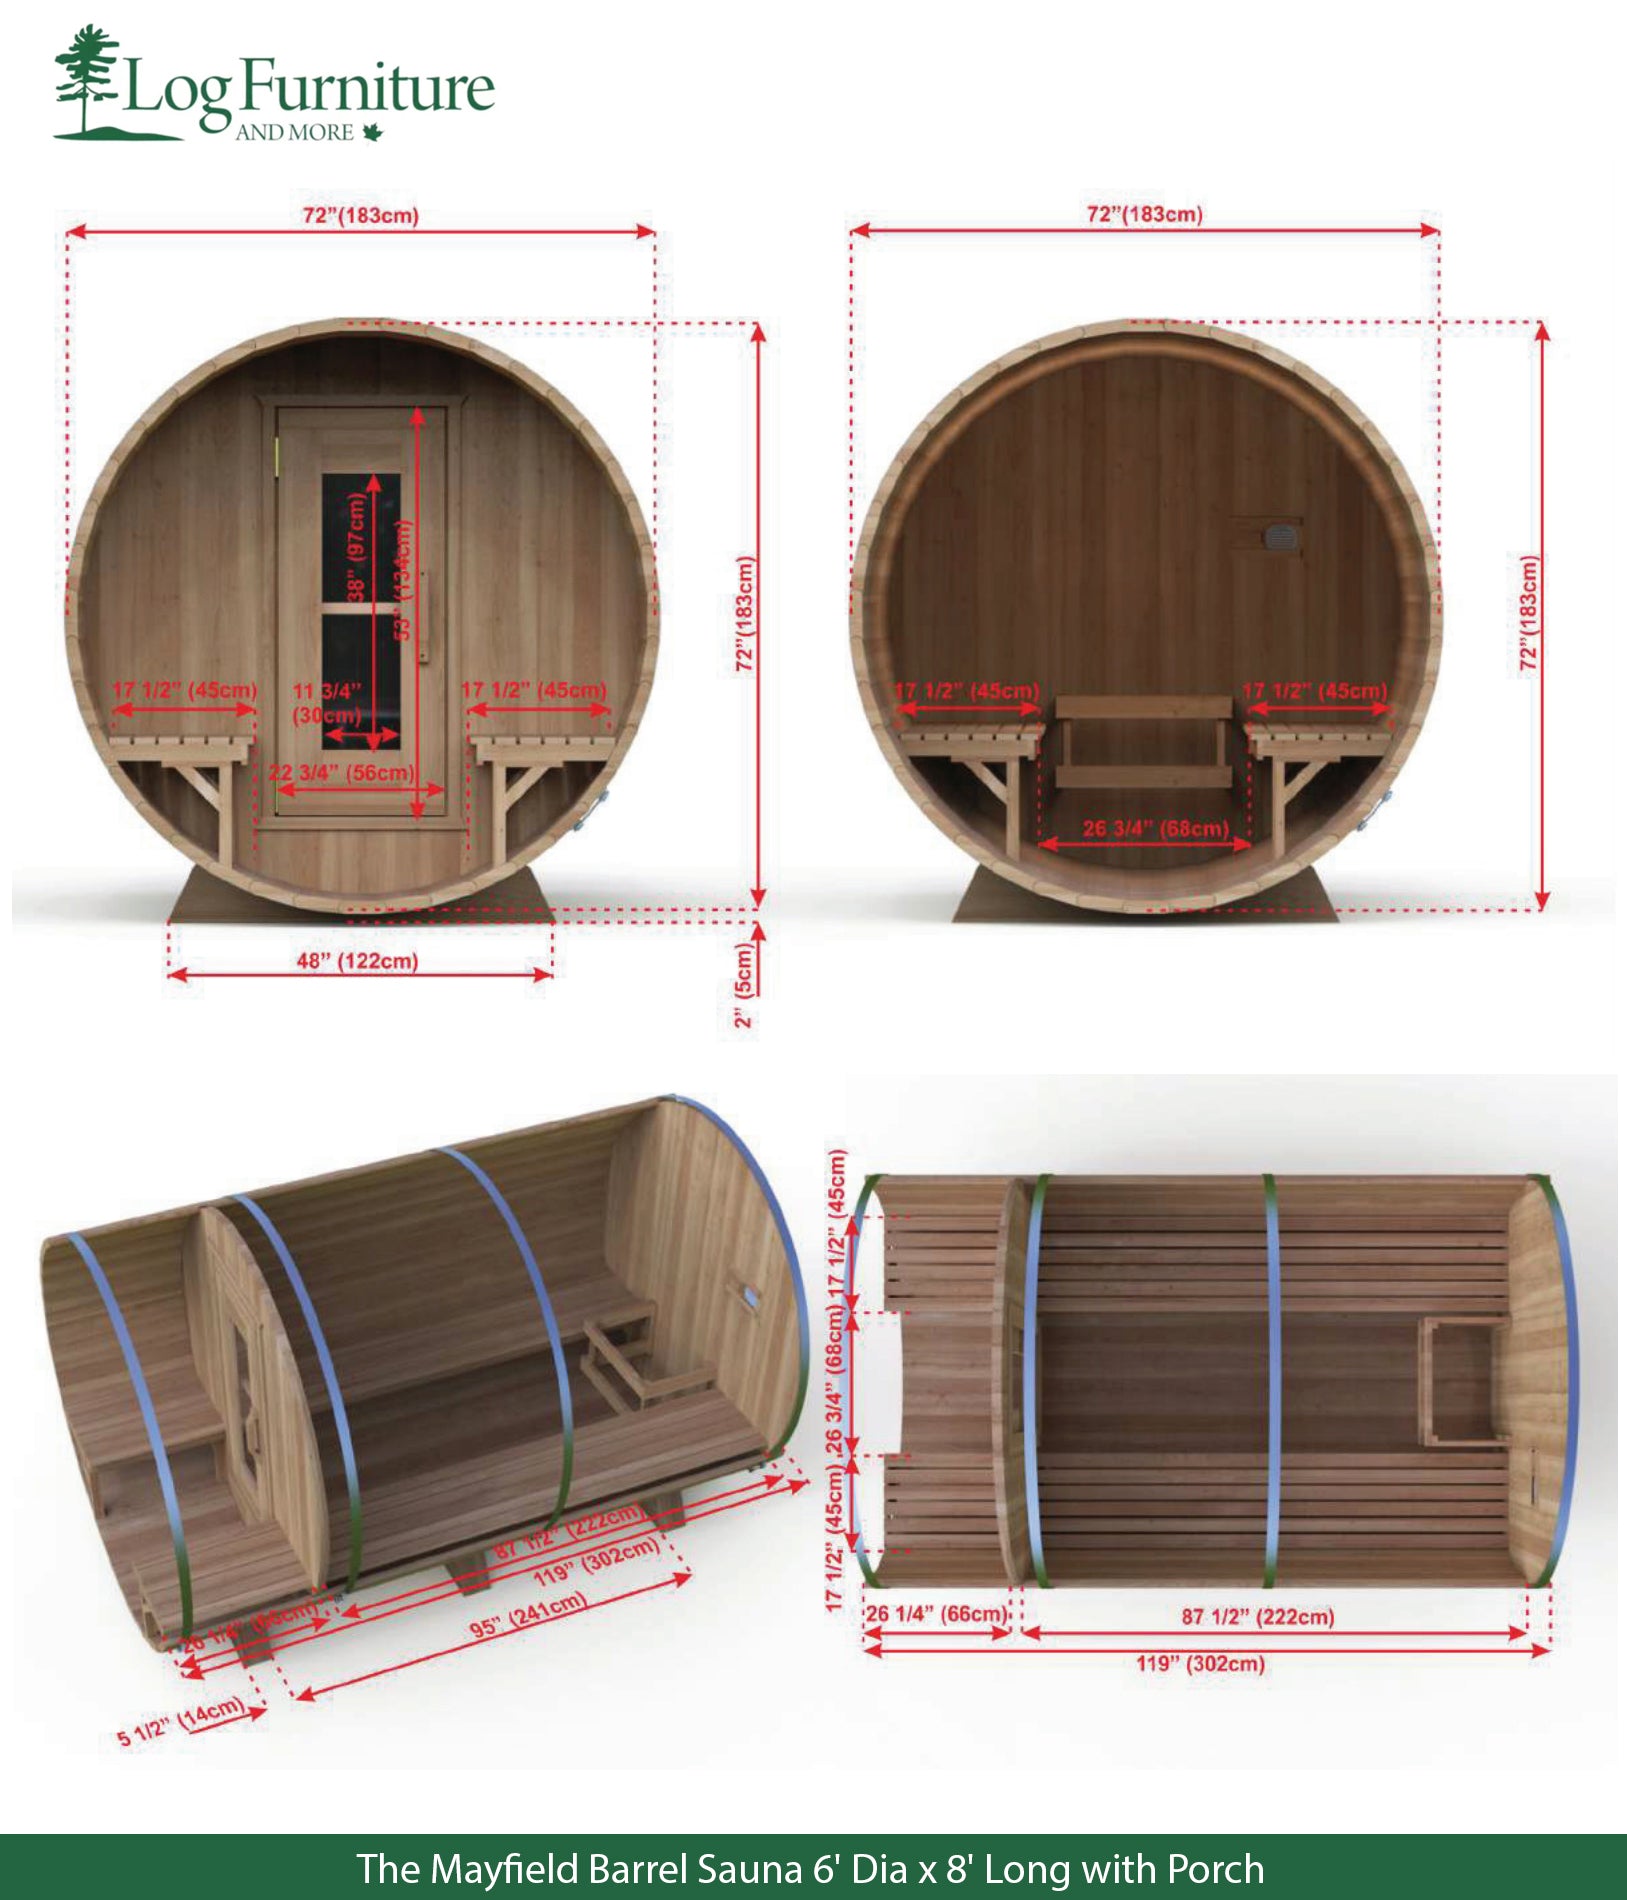 The Mayfield Barrel Sauna 6' Dia x 8' Long with Porch